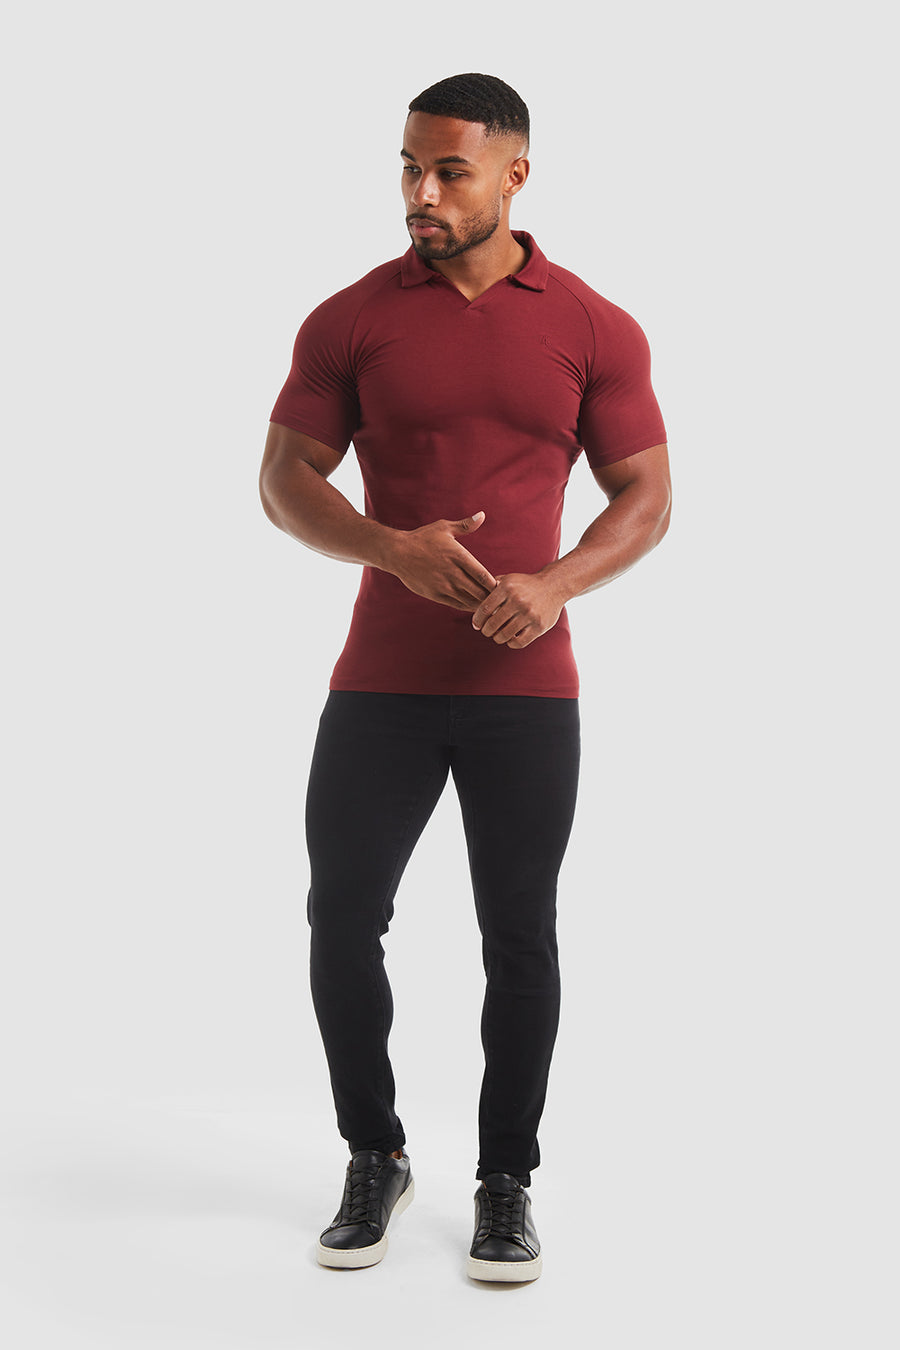 Jersey Buttonless Polo Shirt in Burgundy - TAILORED ATHLETE - USA